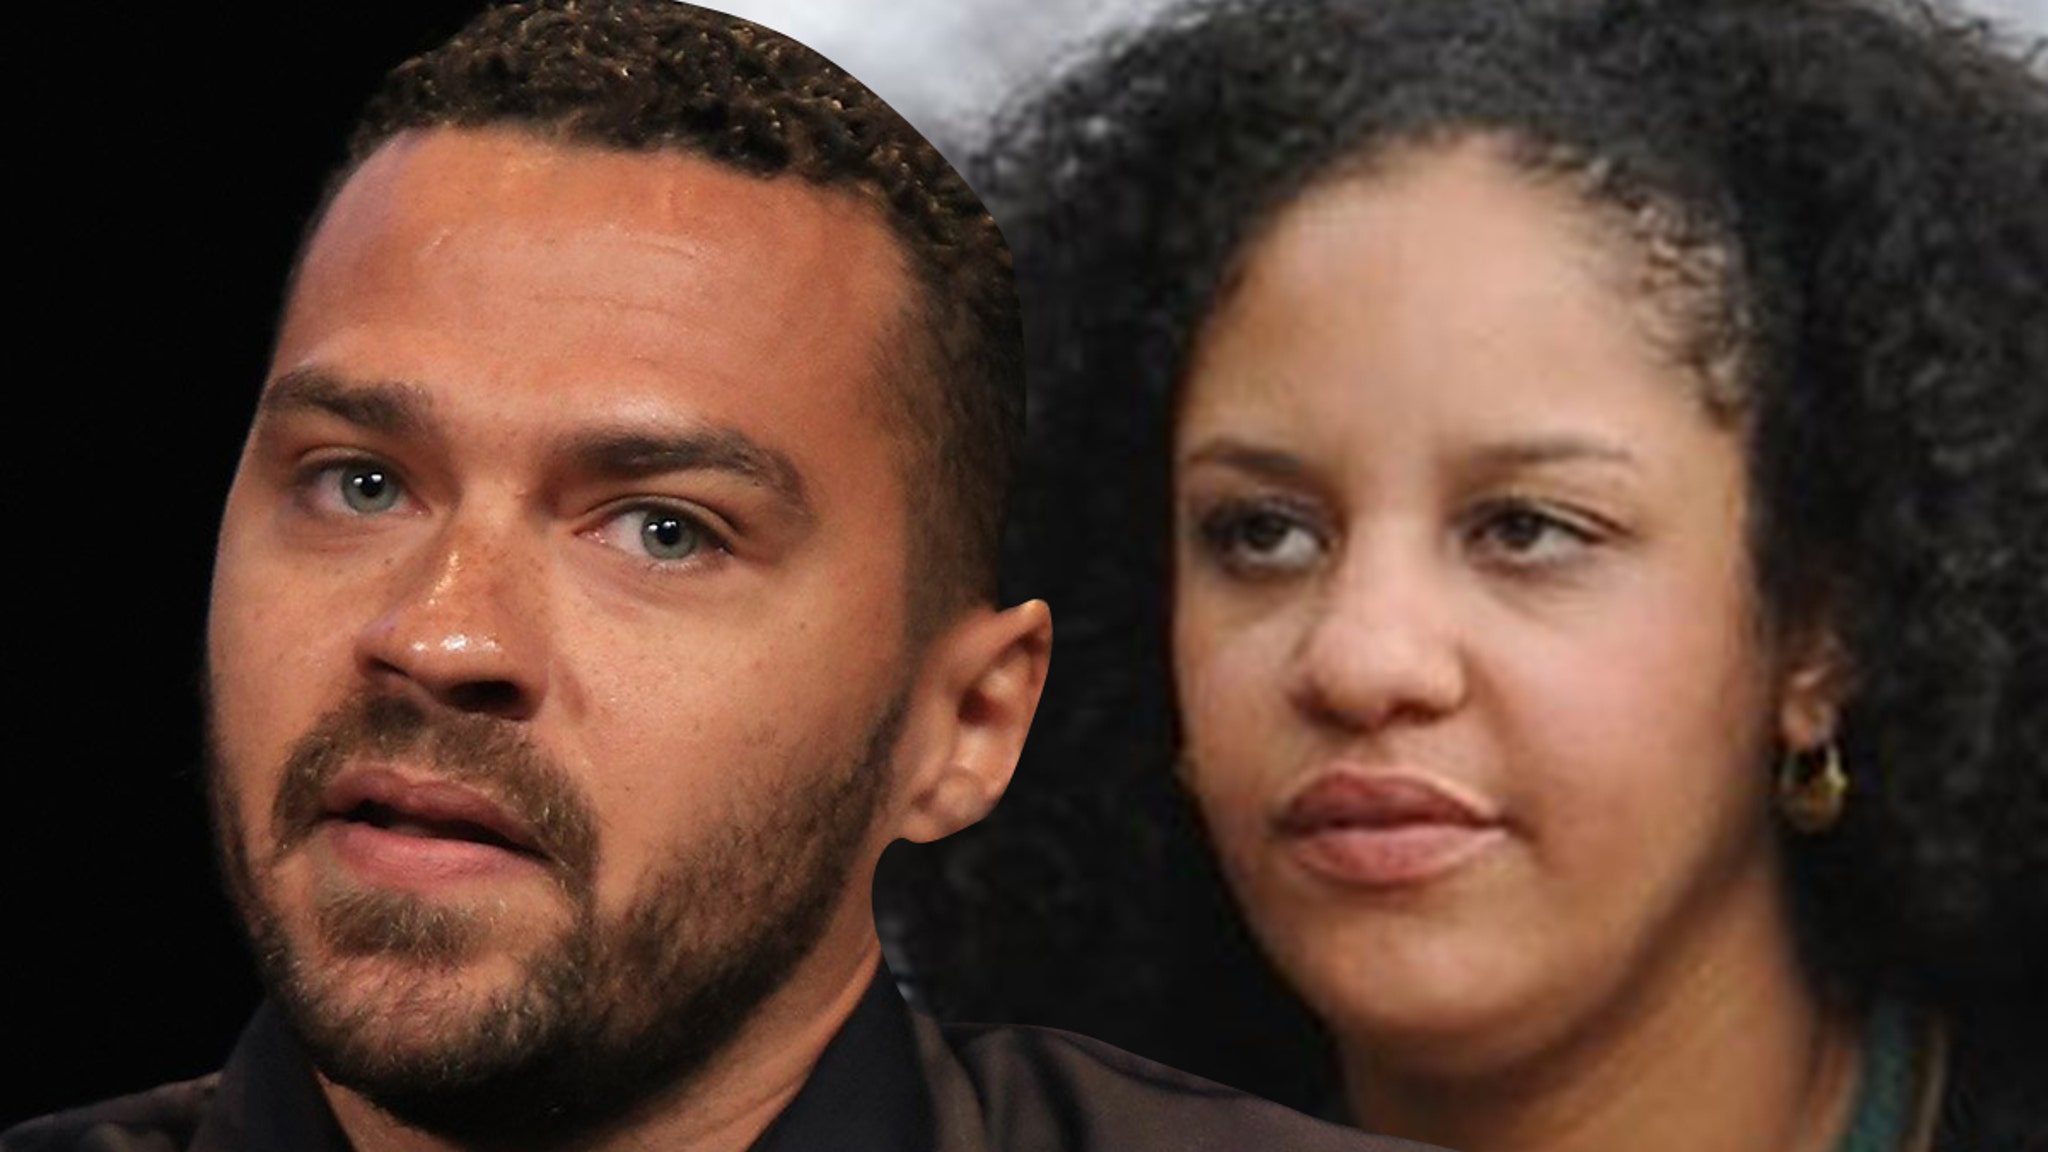 'Grey's Anatomy' Jesse Williams Ordered to Take 'High Conflict Parents' Course - TMZ